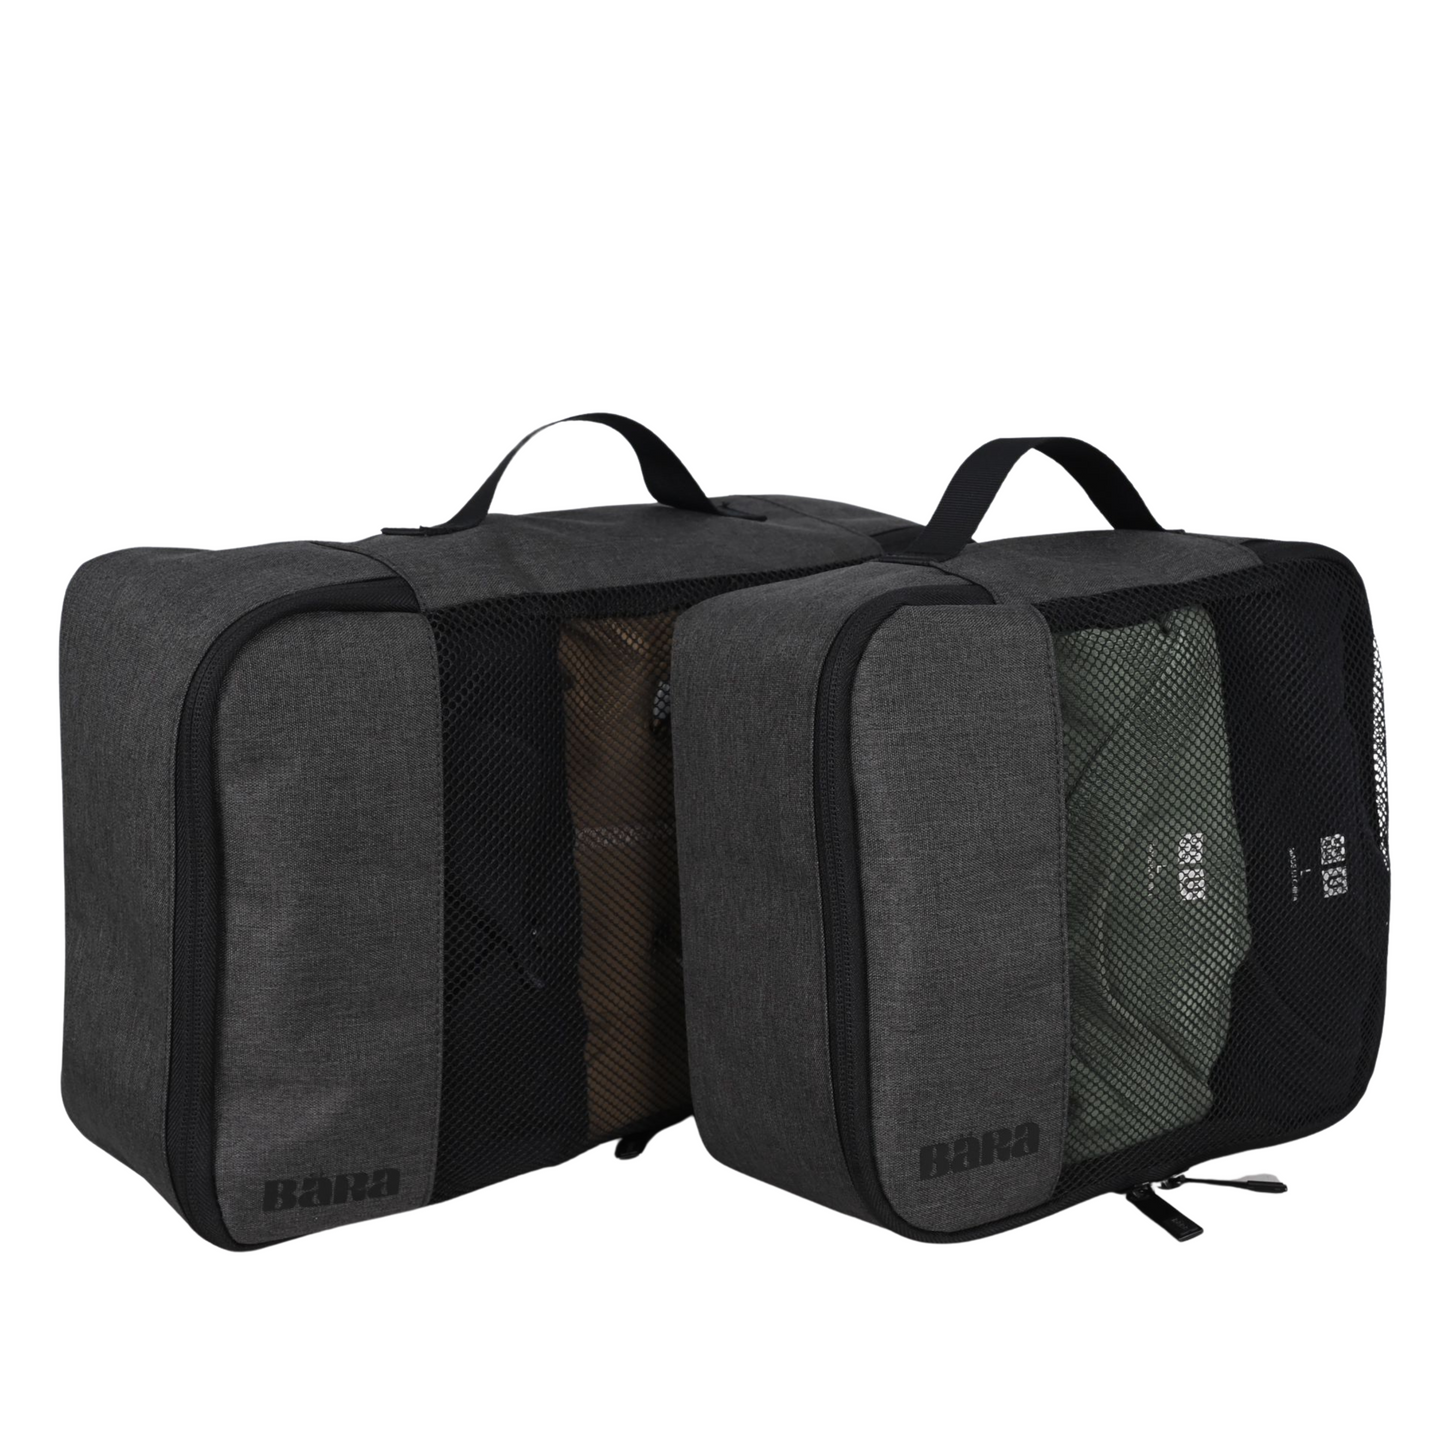 BÄRA Set of 2 Packing Cubes for Carry On Suitcase Organization